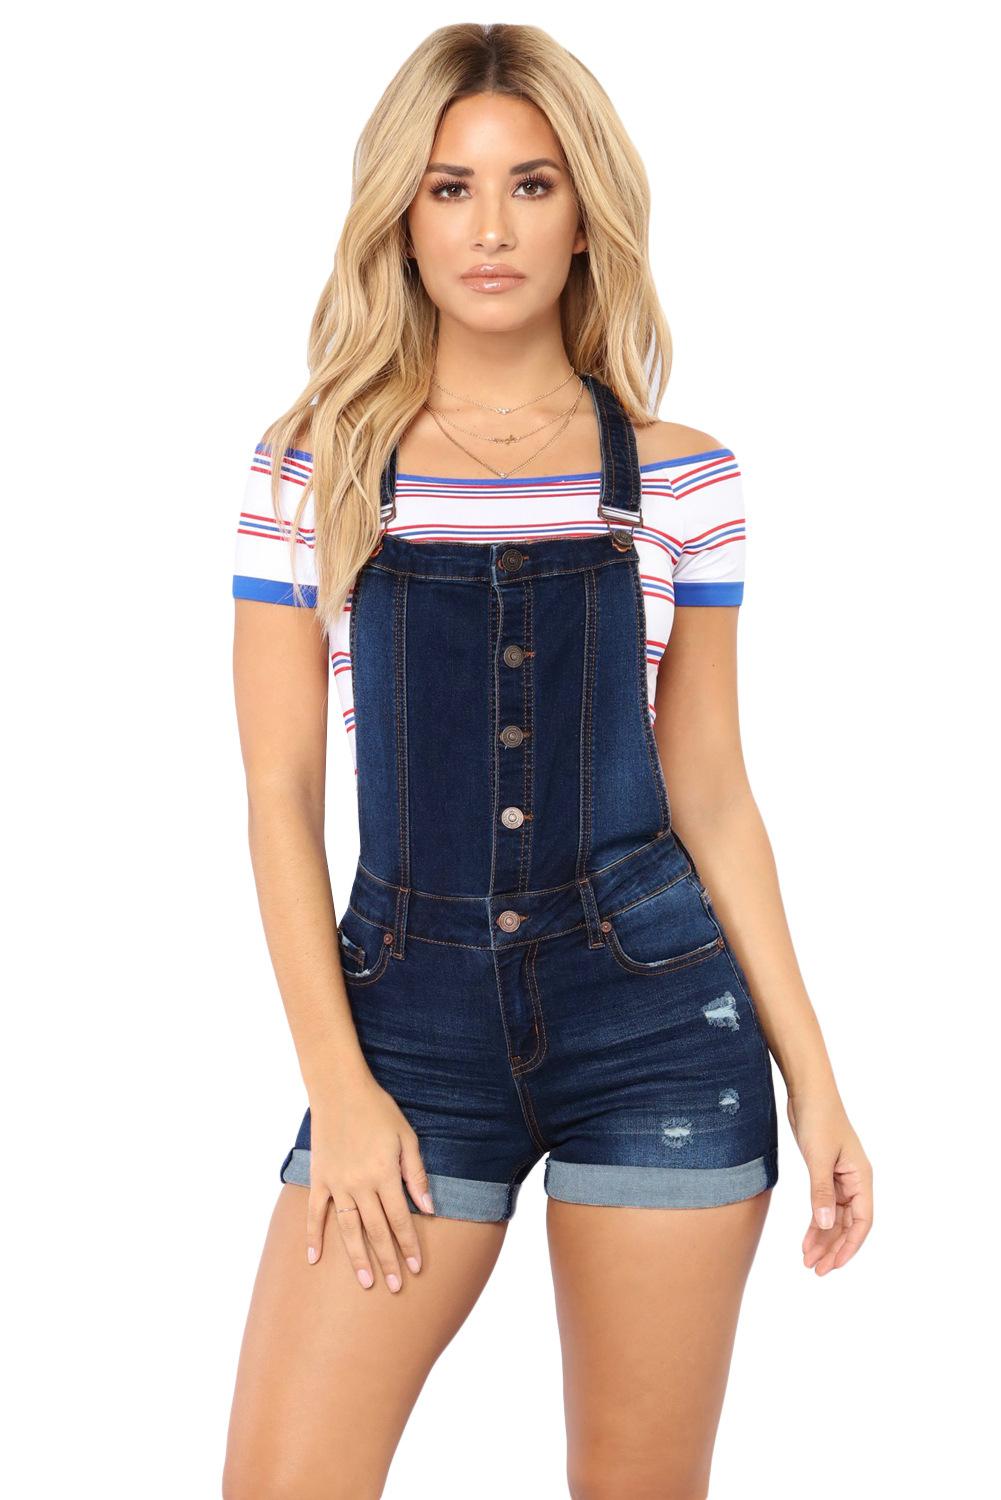 Women Summer Denim Bib Overalls Jeans Shorts Jumpsuits and Rompers Playsuit